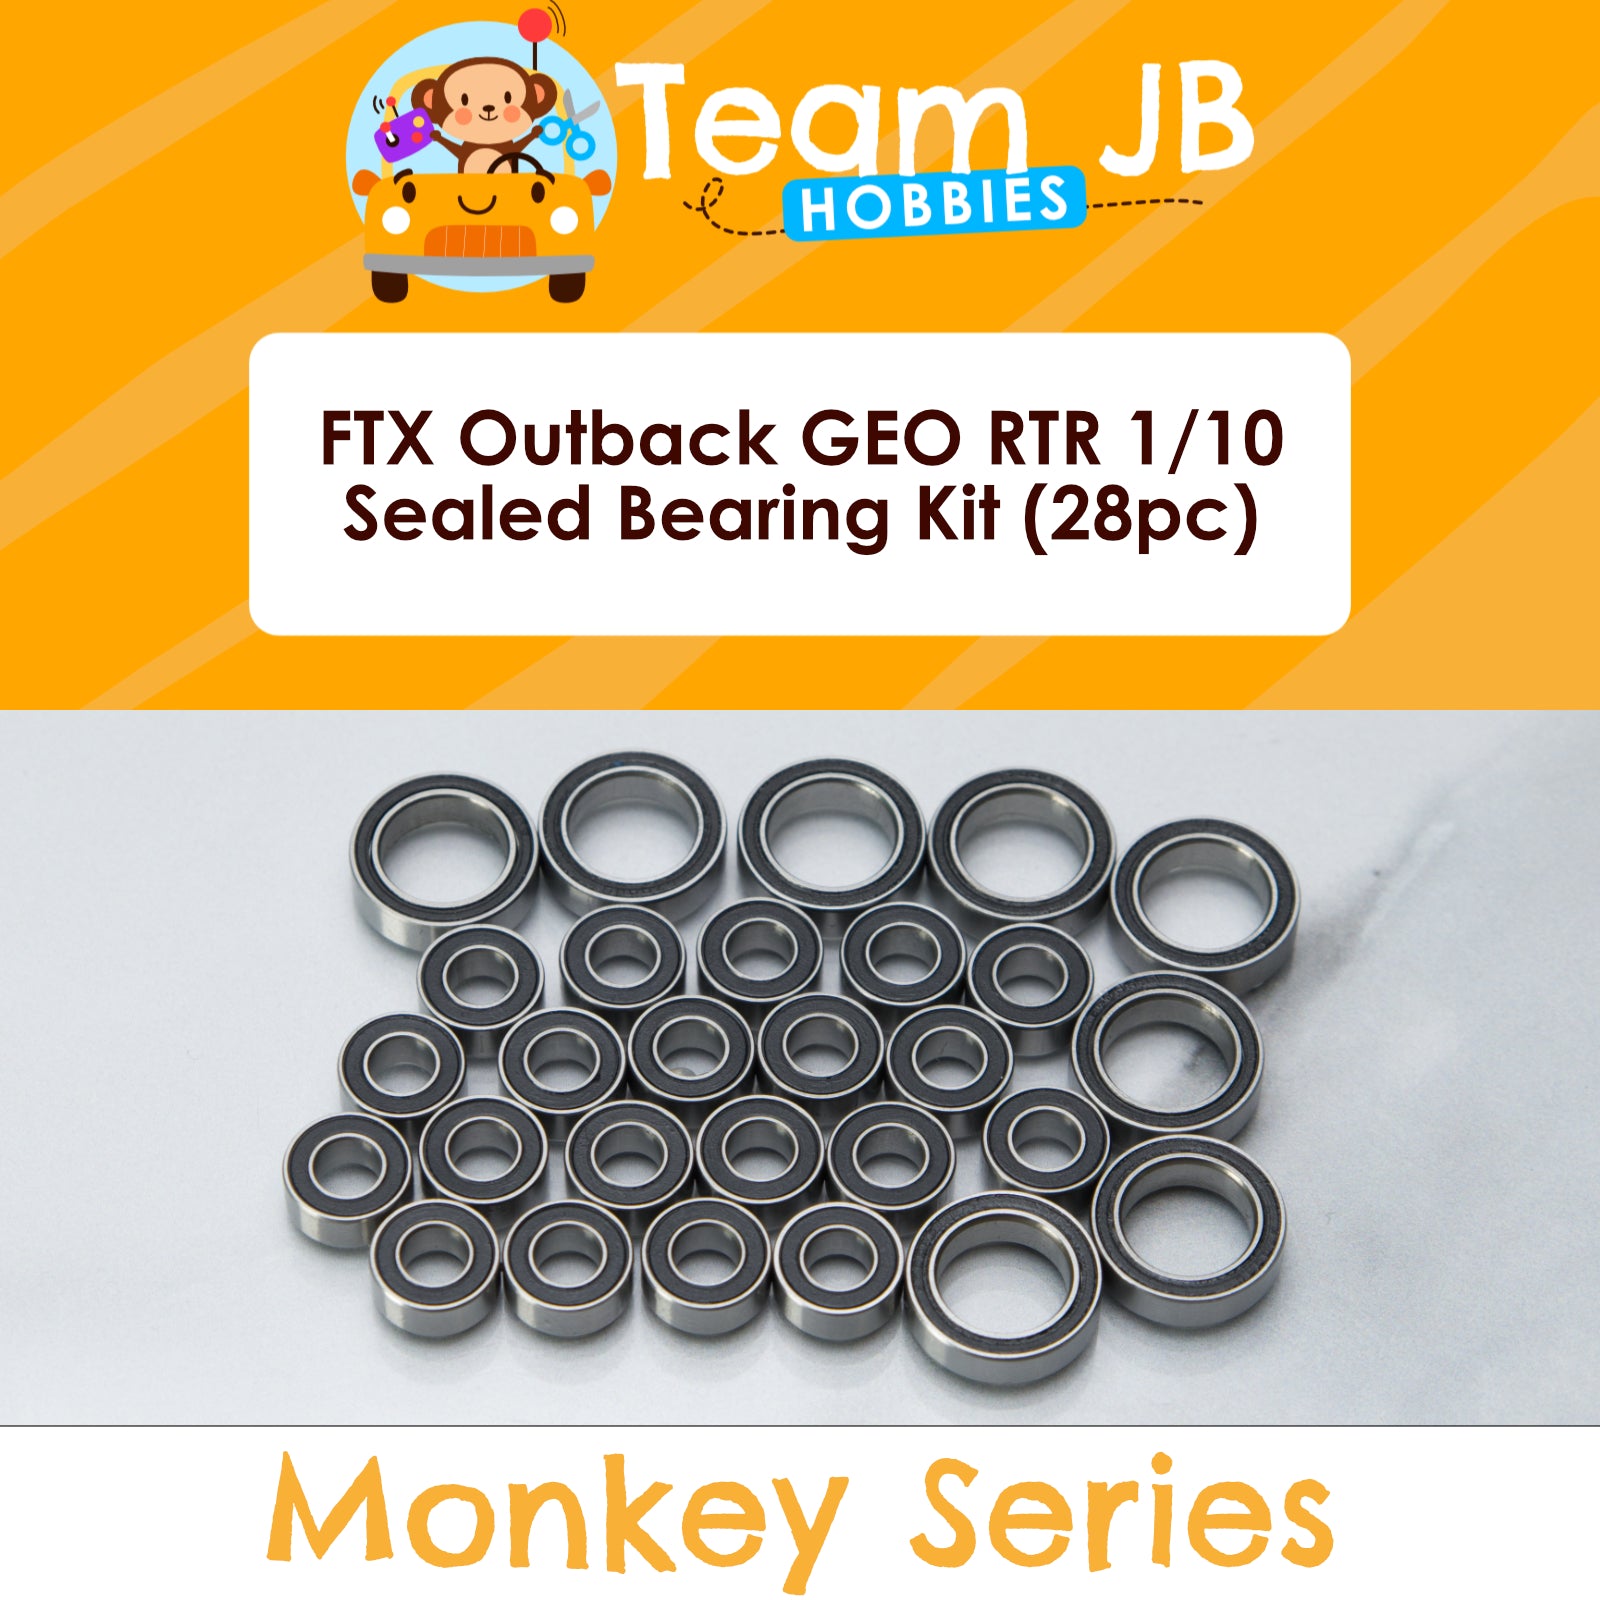 FTX Outback GEO RTR 1/10 - Sealed Bearing Kit